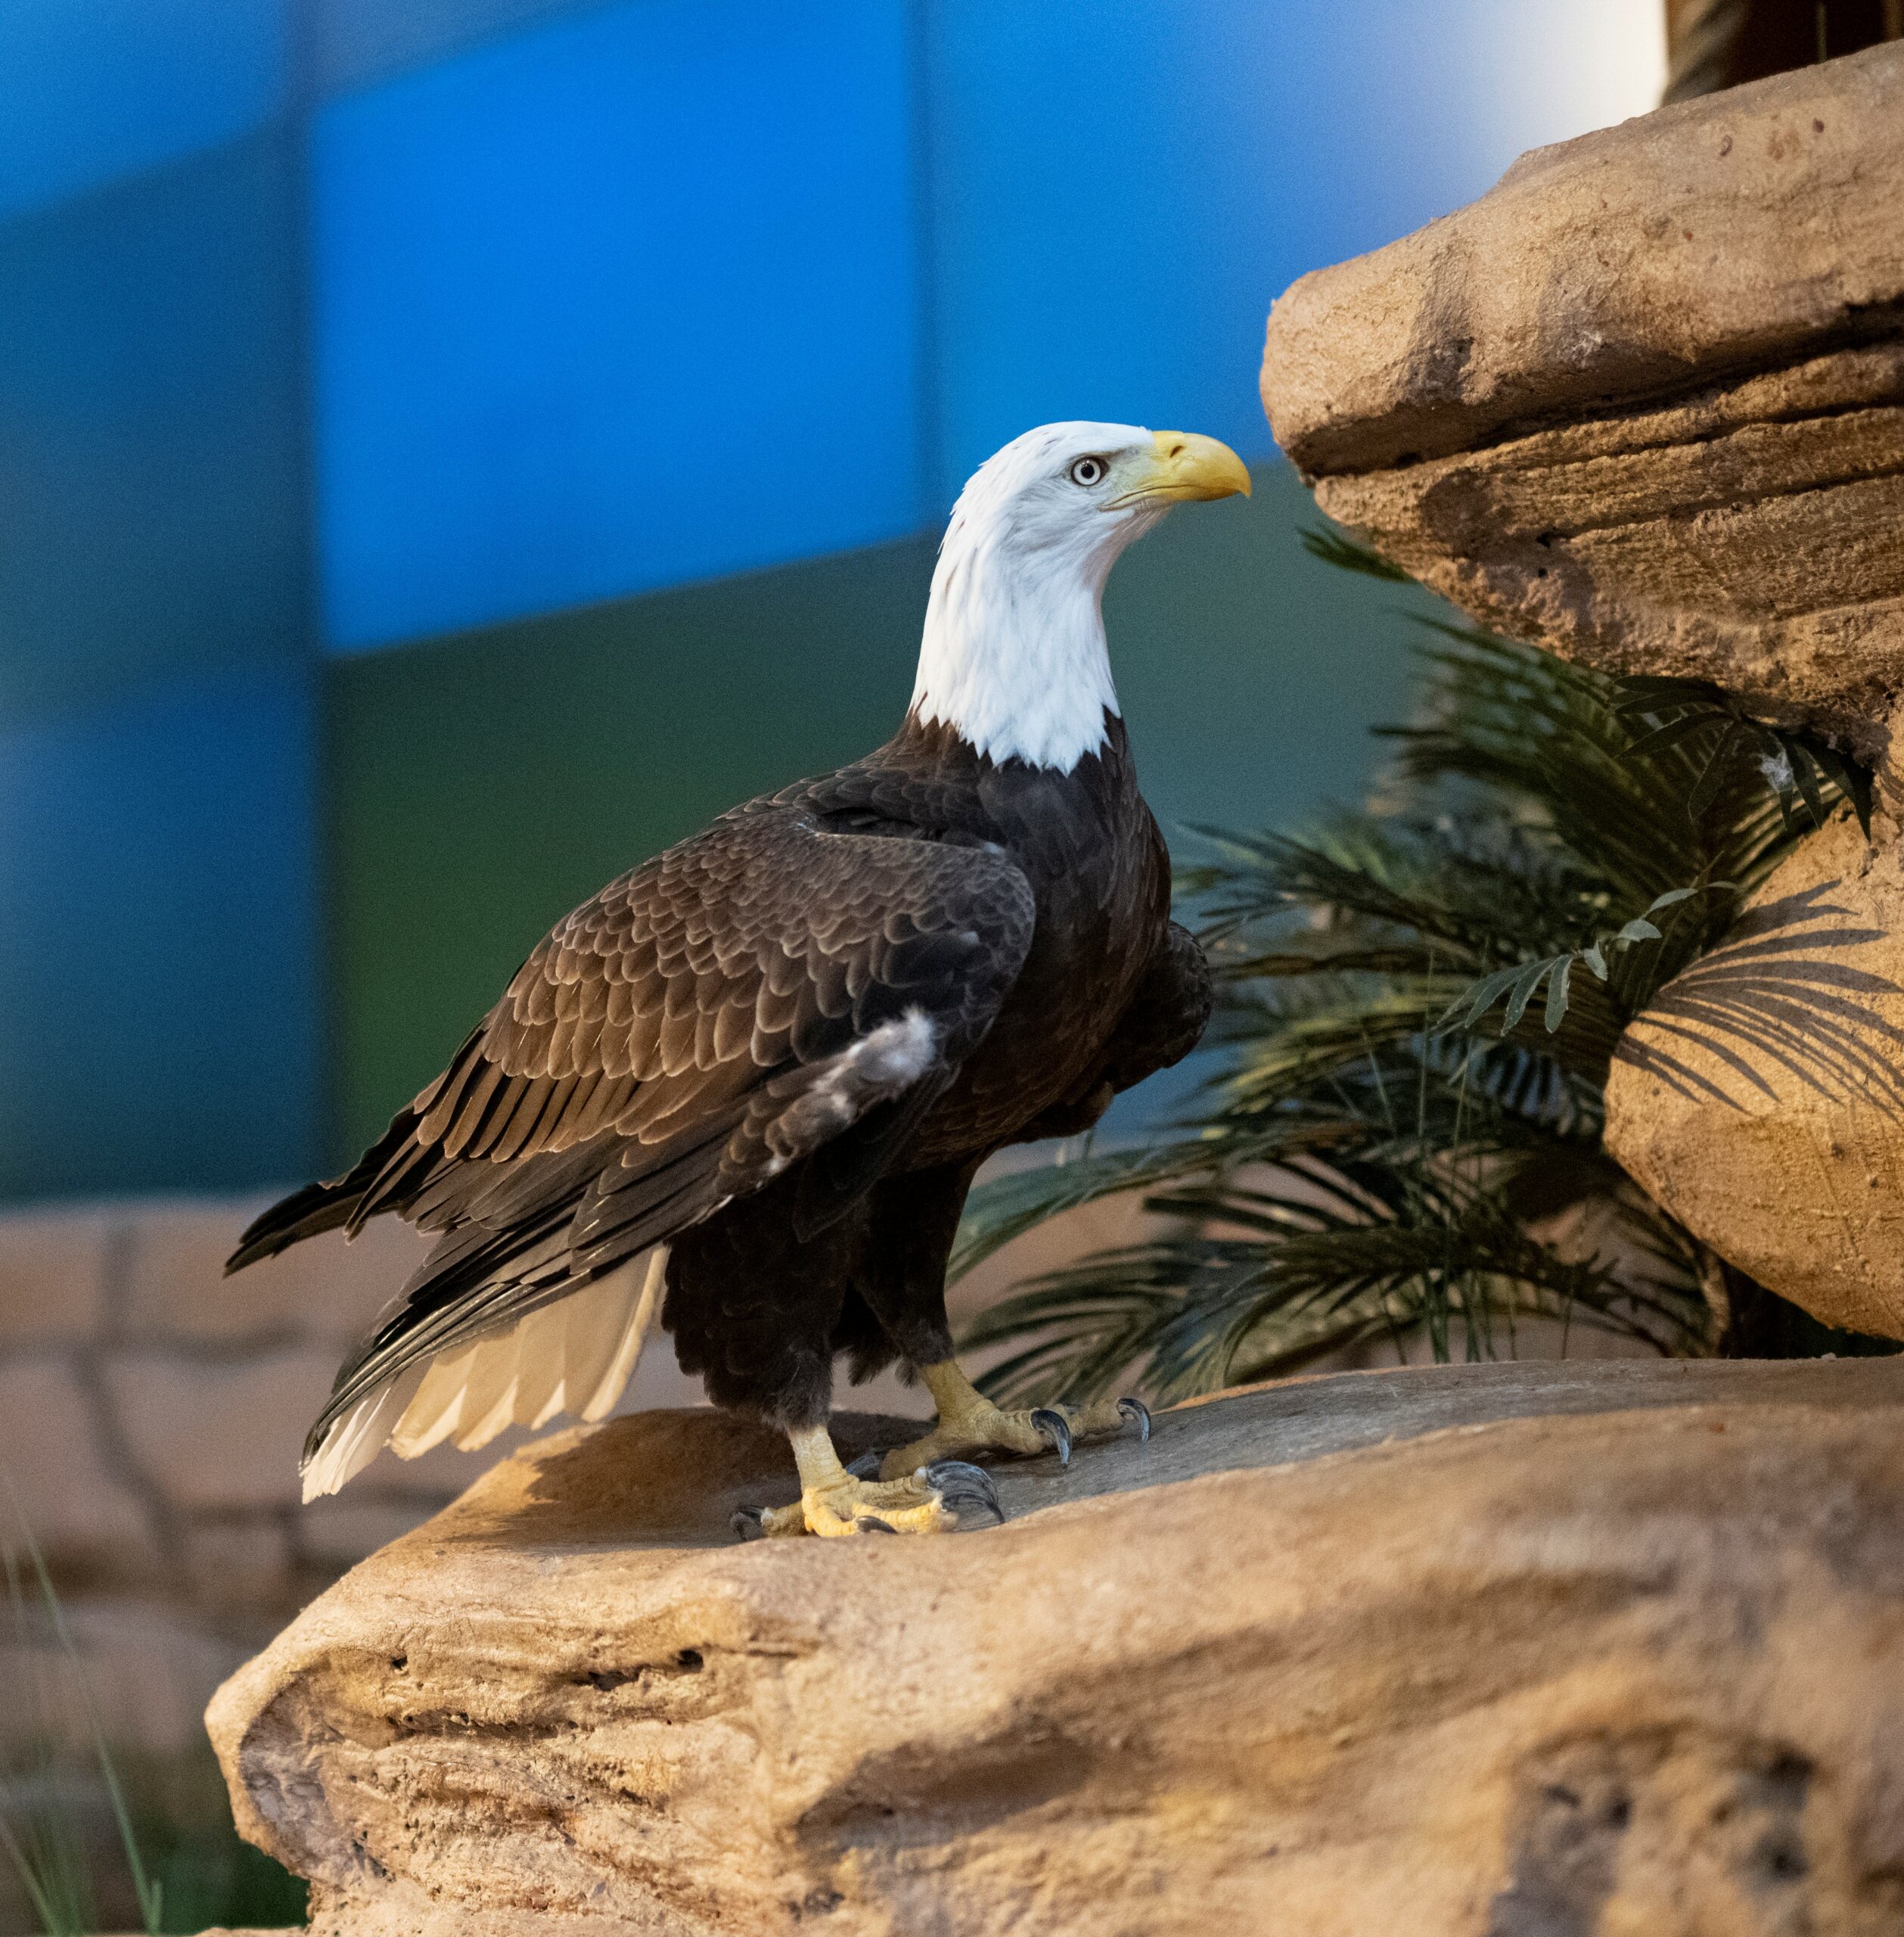 A Bald Eagle perched on a rock during the National Aviary's Immersive Bird Show!